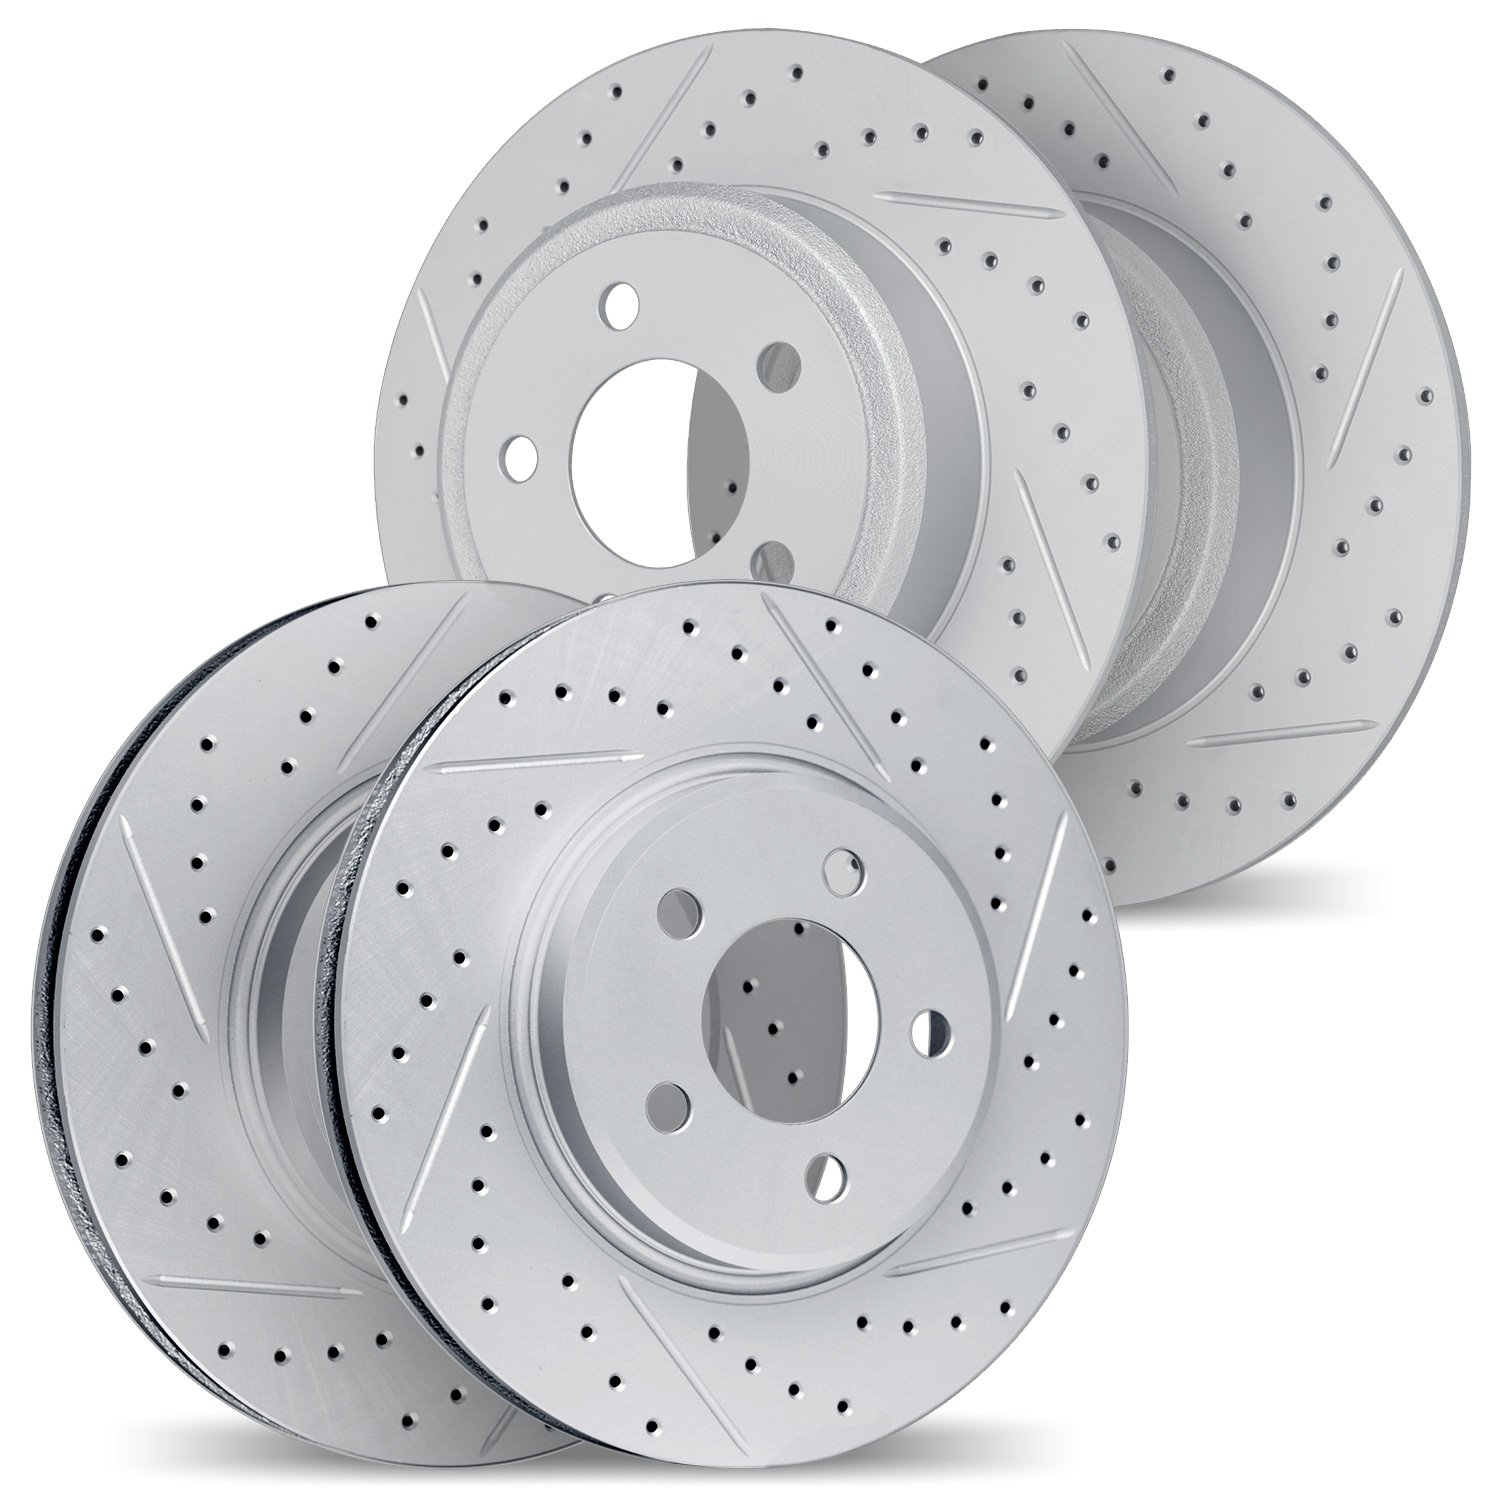 2004-74030 Geoperformance Drilled/Slotted Brake Rotors, 1997-2002 Audi/Volkswagen, Position: Front and Rear